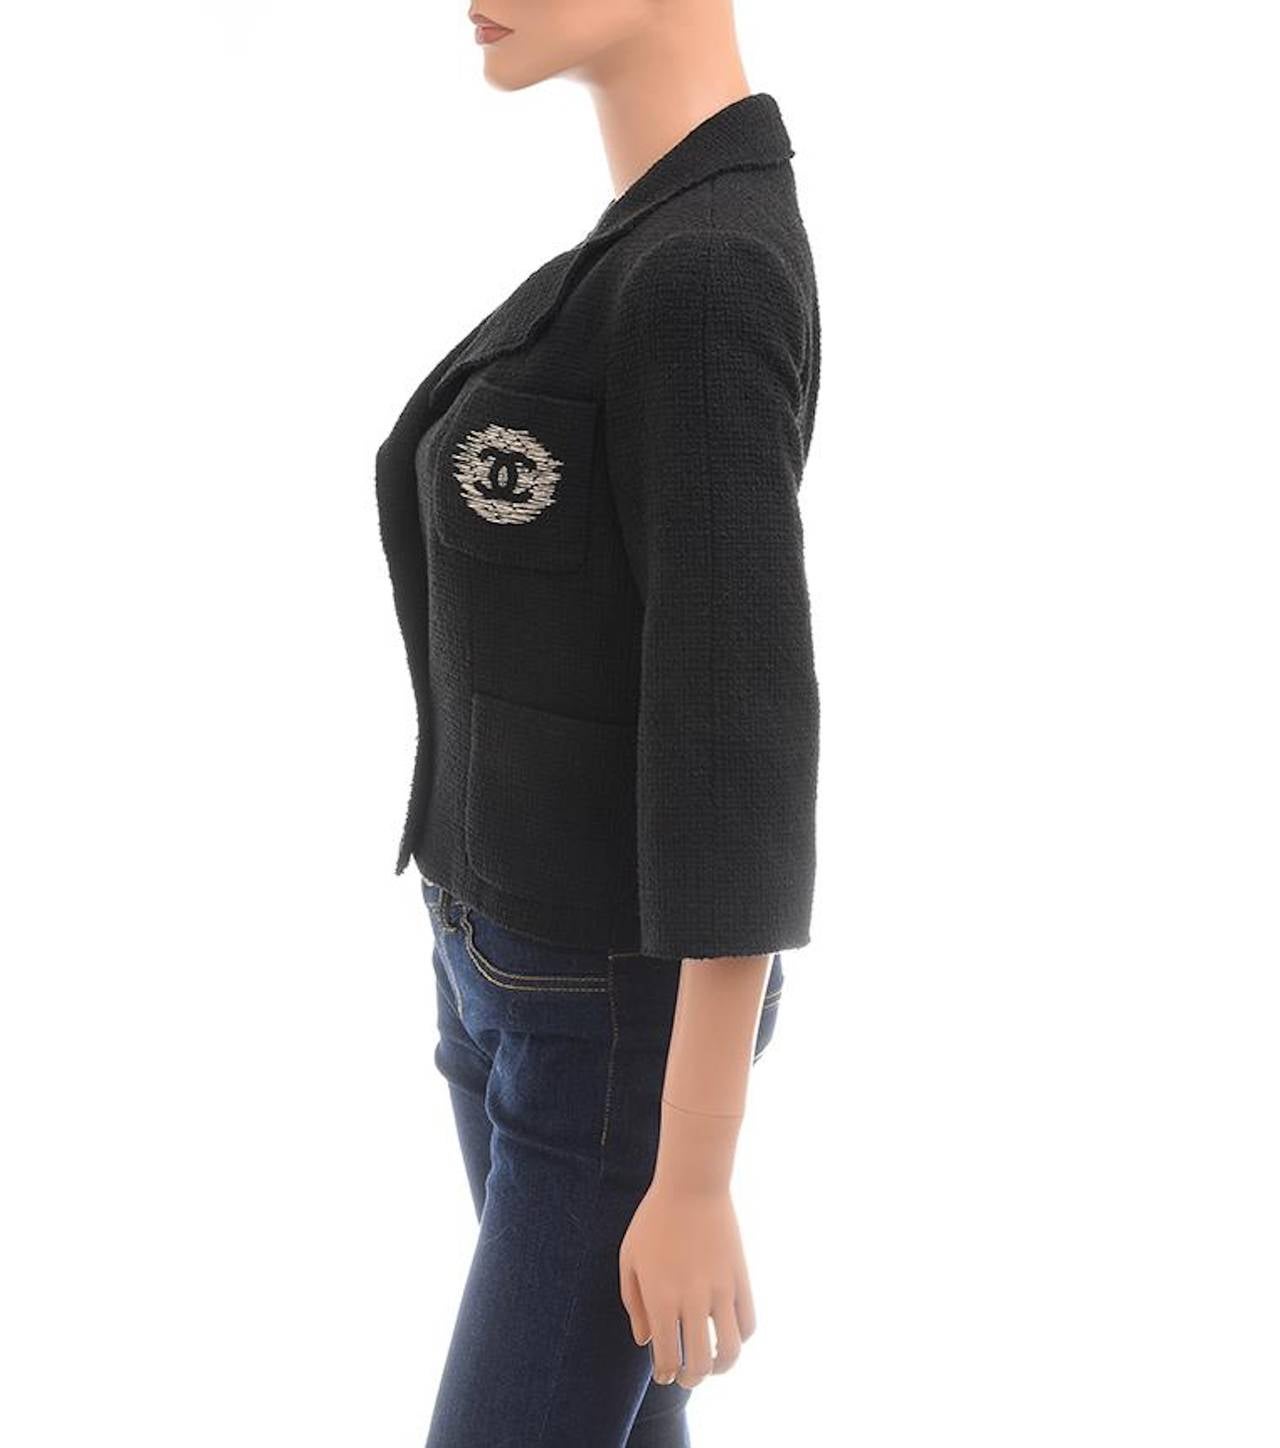 Chanel black boucle cropped jacket with notch collar and lapels, breast pocket with large silver CC embroidered applique, front button closure in double breasted style, 3/4 sleeves, and signature CC and camellia silk lining with weighted chain at